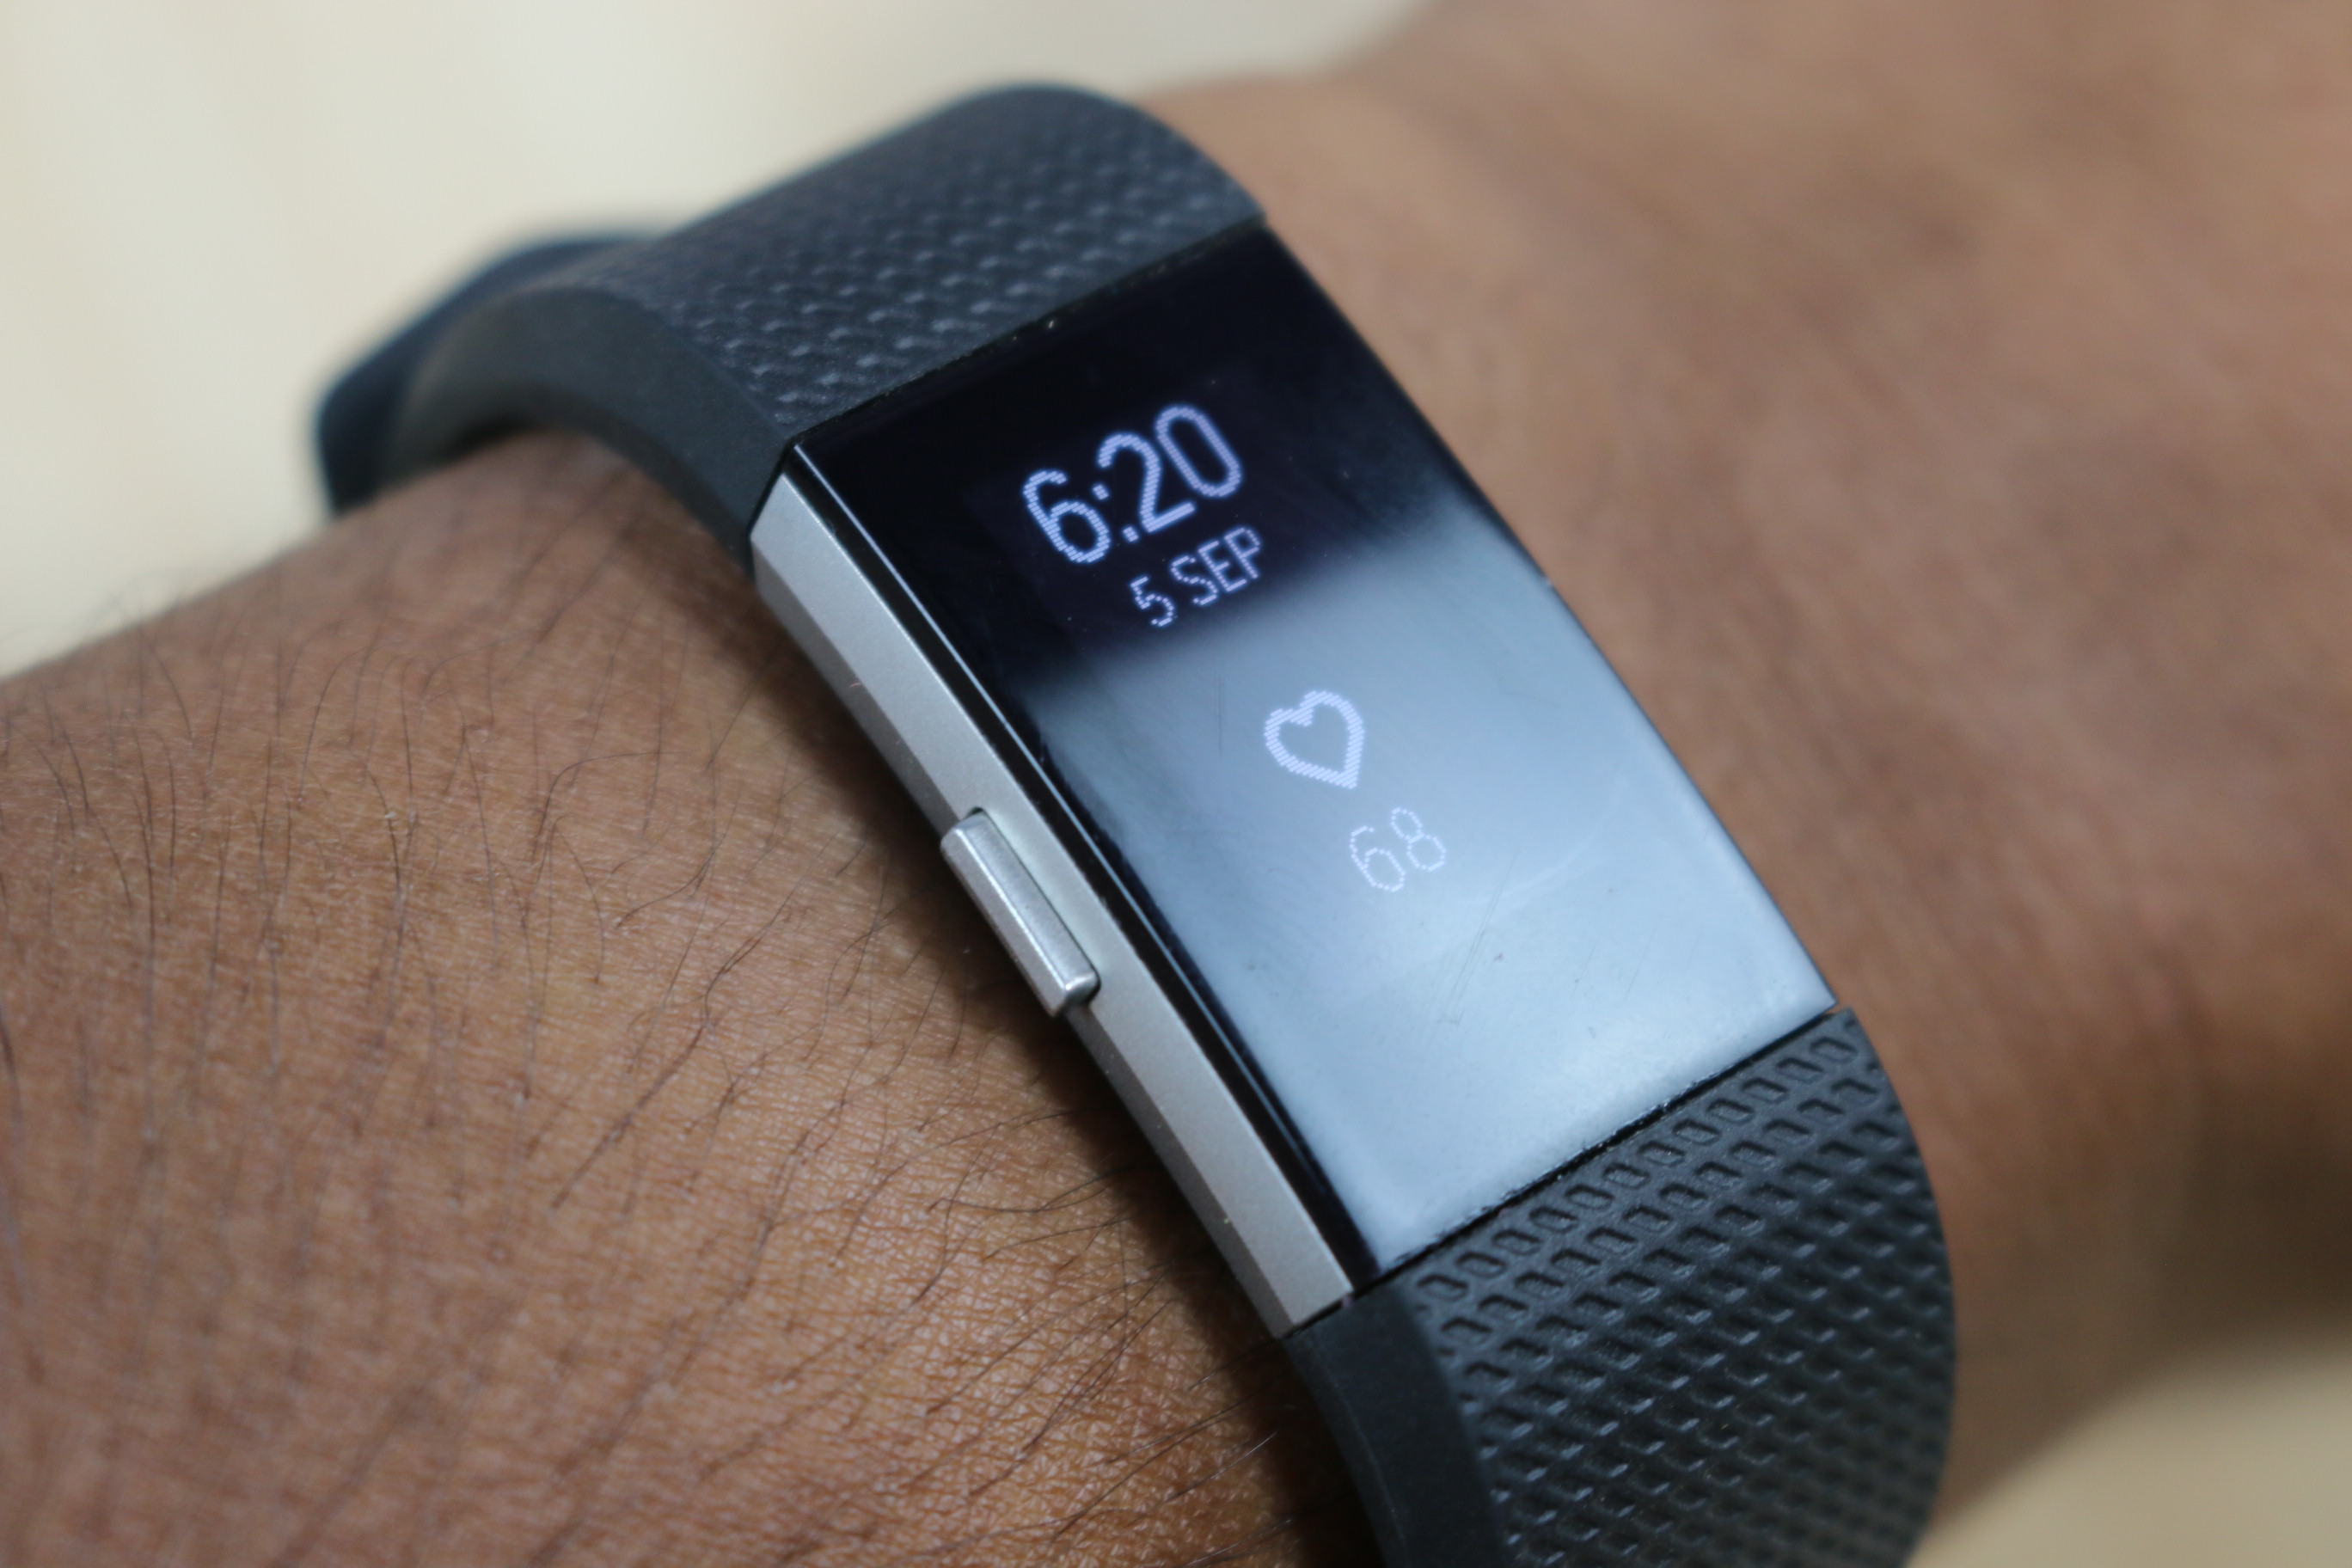 Fitbit Charge 2 Initial Impressions- A Worthy Upgrade - Gadgets To Use